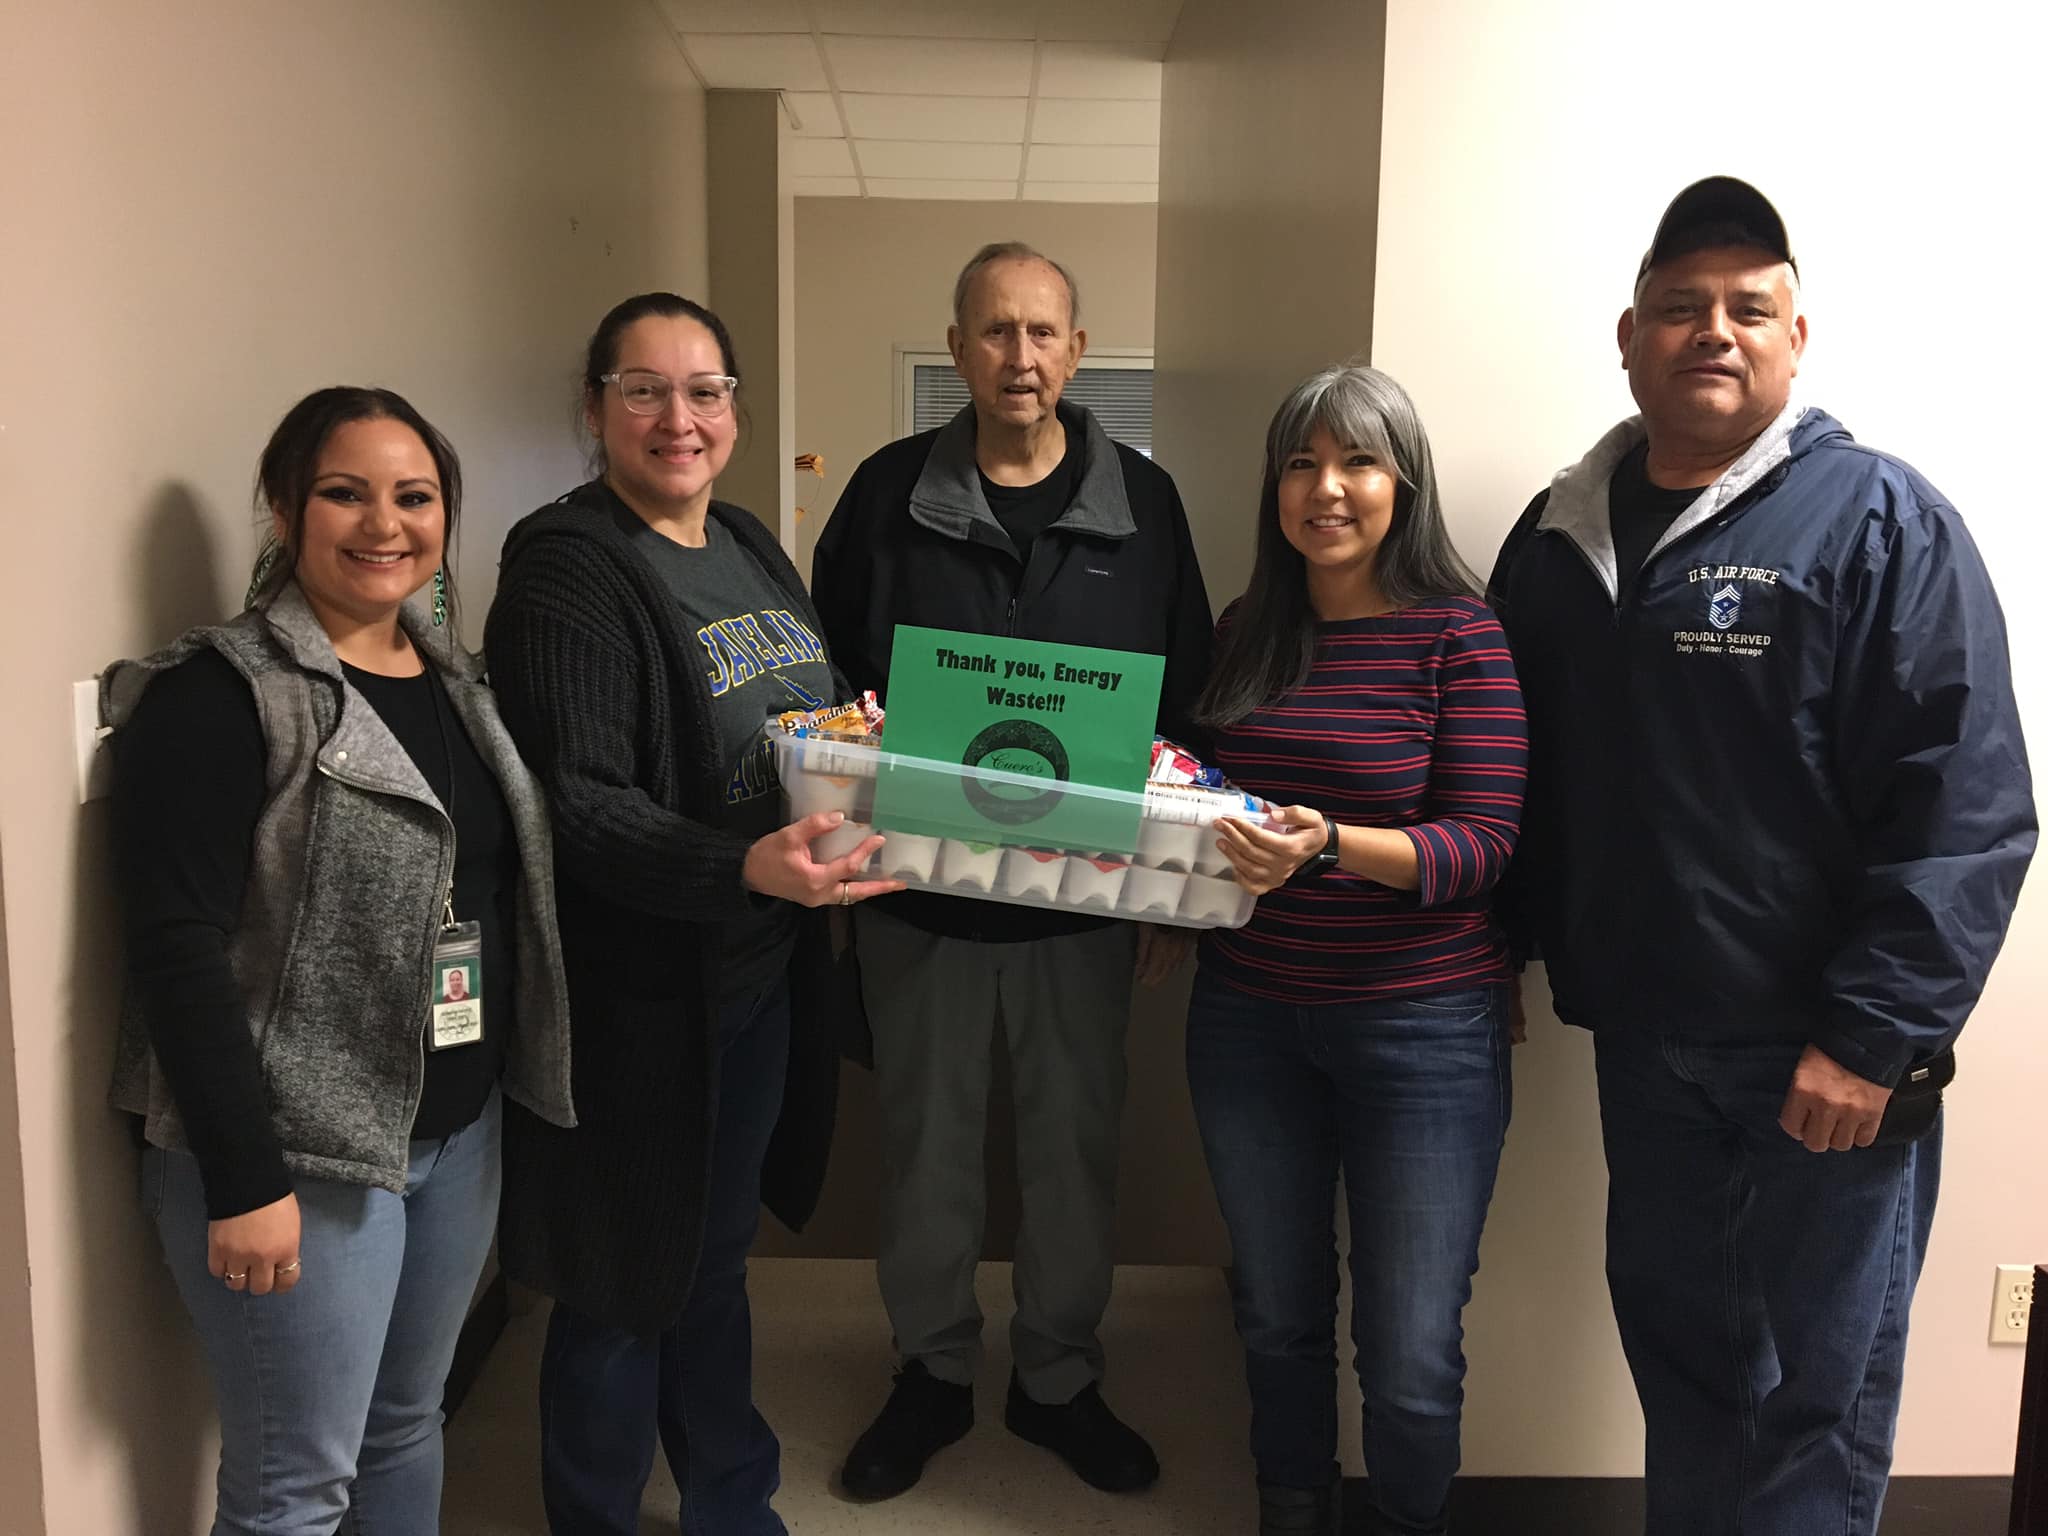 December Events Committee presents “thank you” snack care package to Energy Waste Rentals & Service